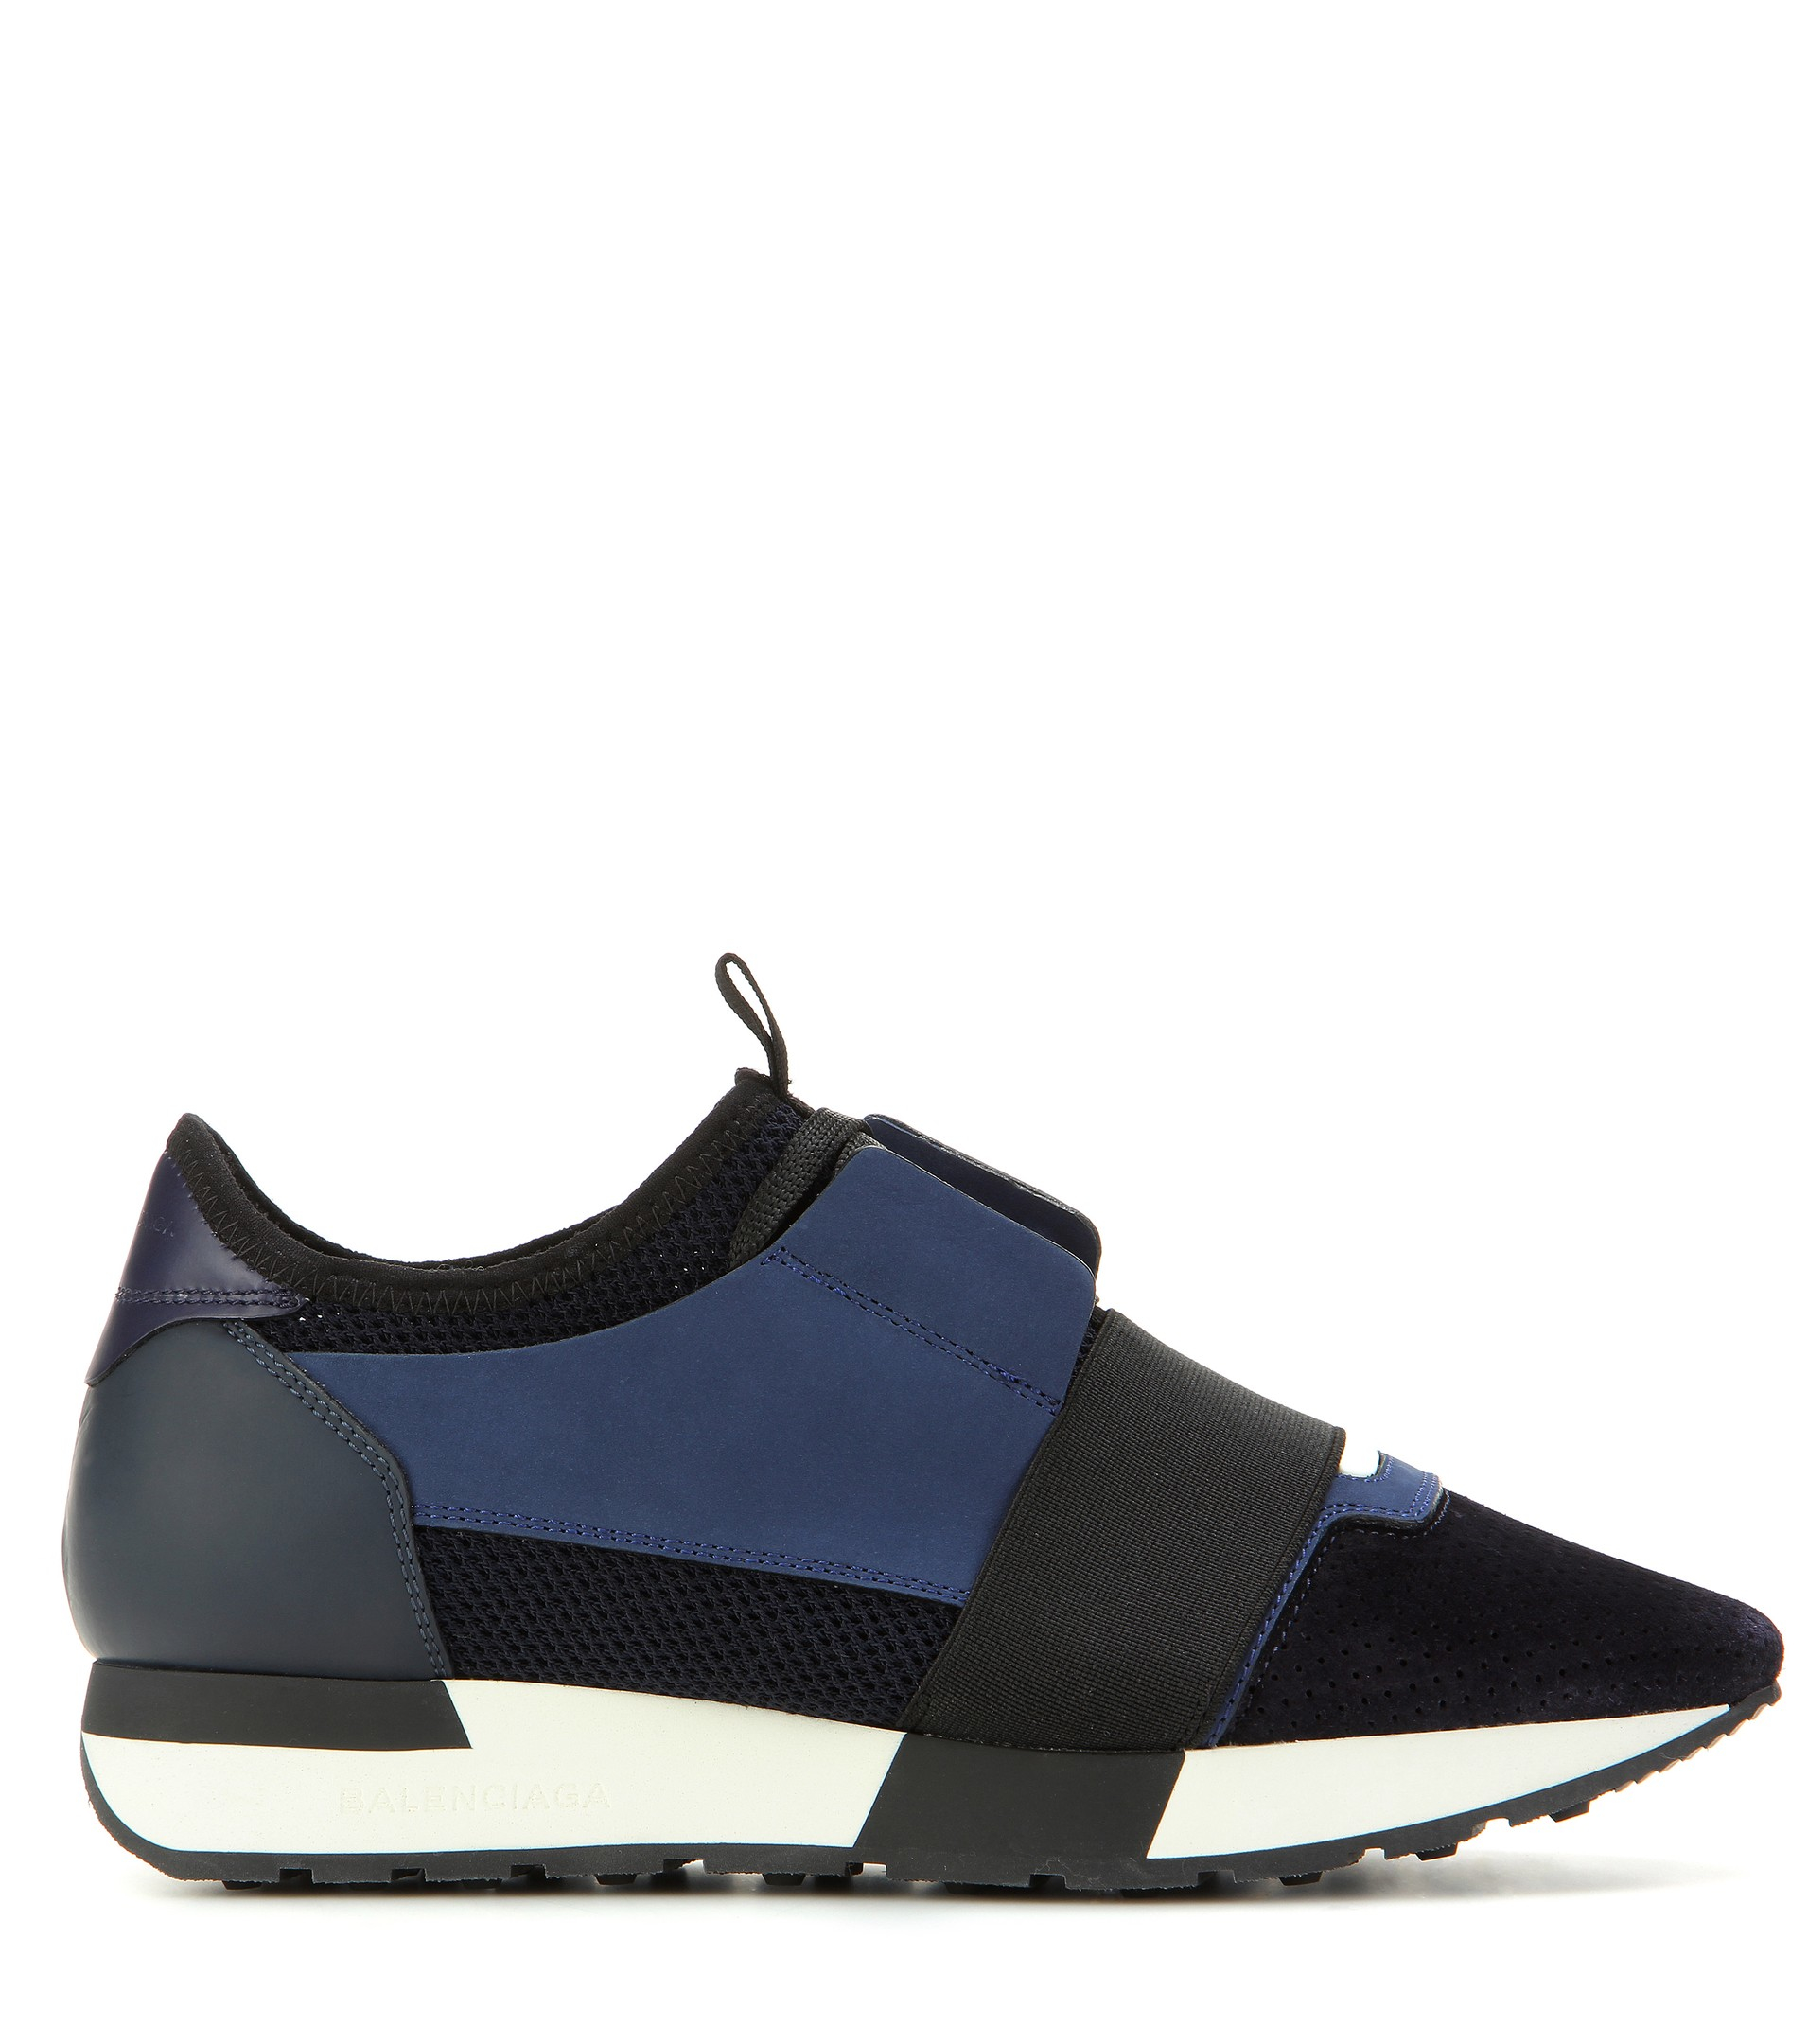 Balenciaga Race Runner Fabric, Leather And Suede Sneakers in Blue - Lyst